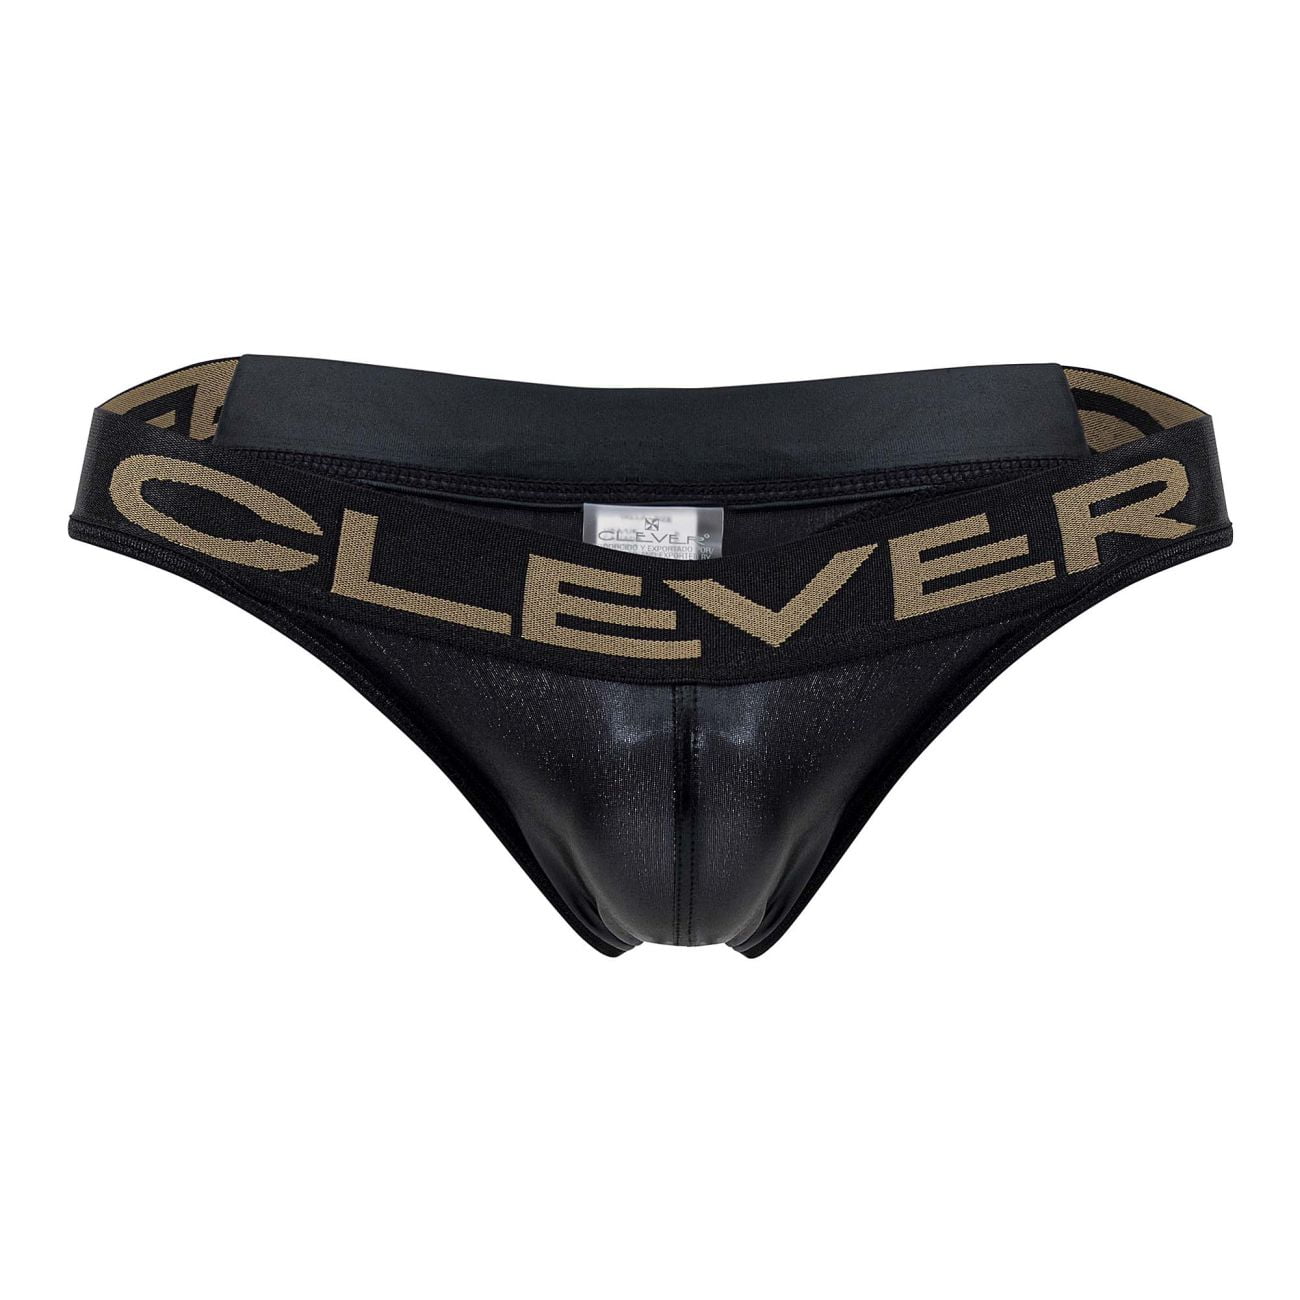 Clever Moda 1410 Earth Thongs Color Black Size XL